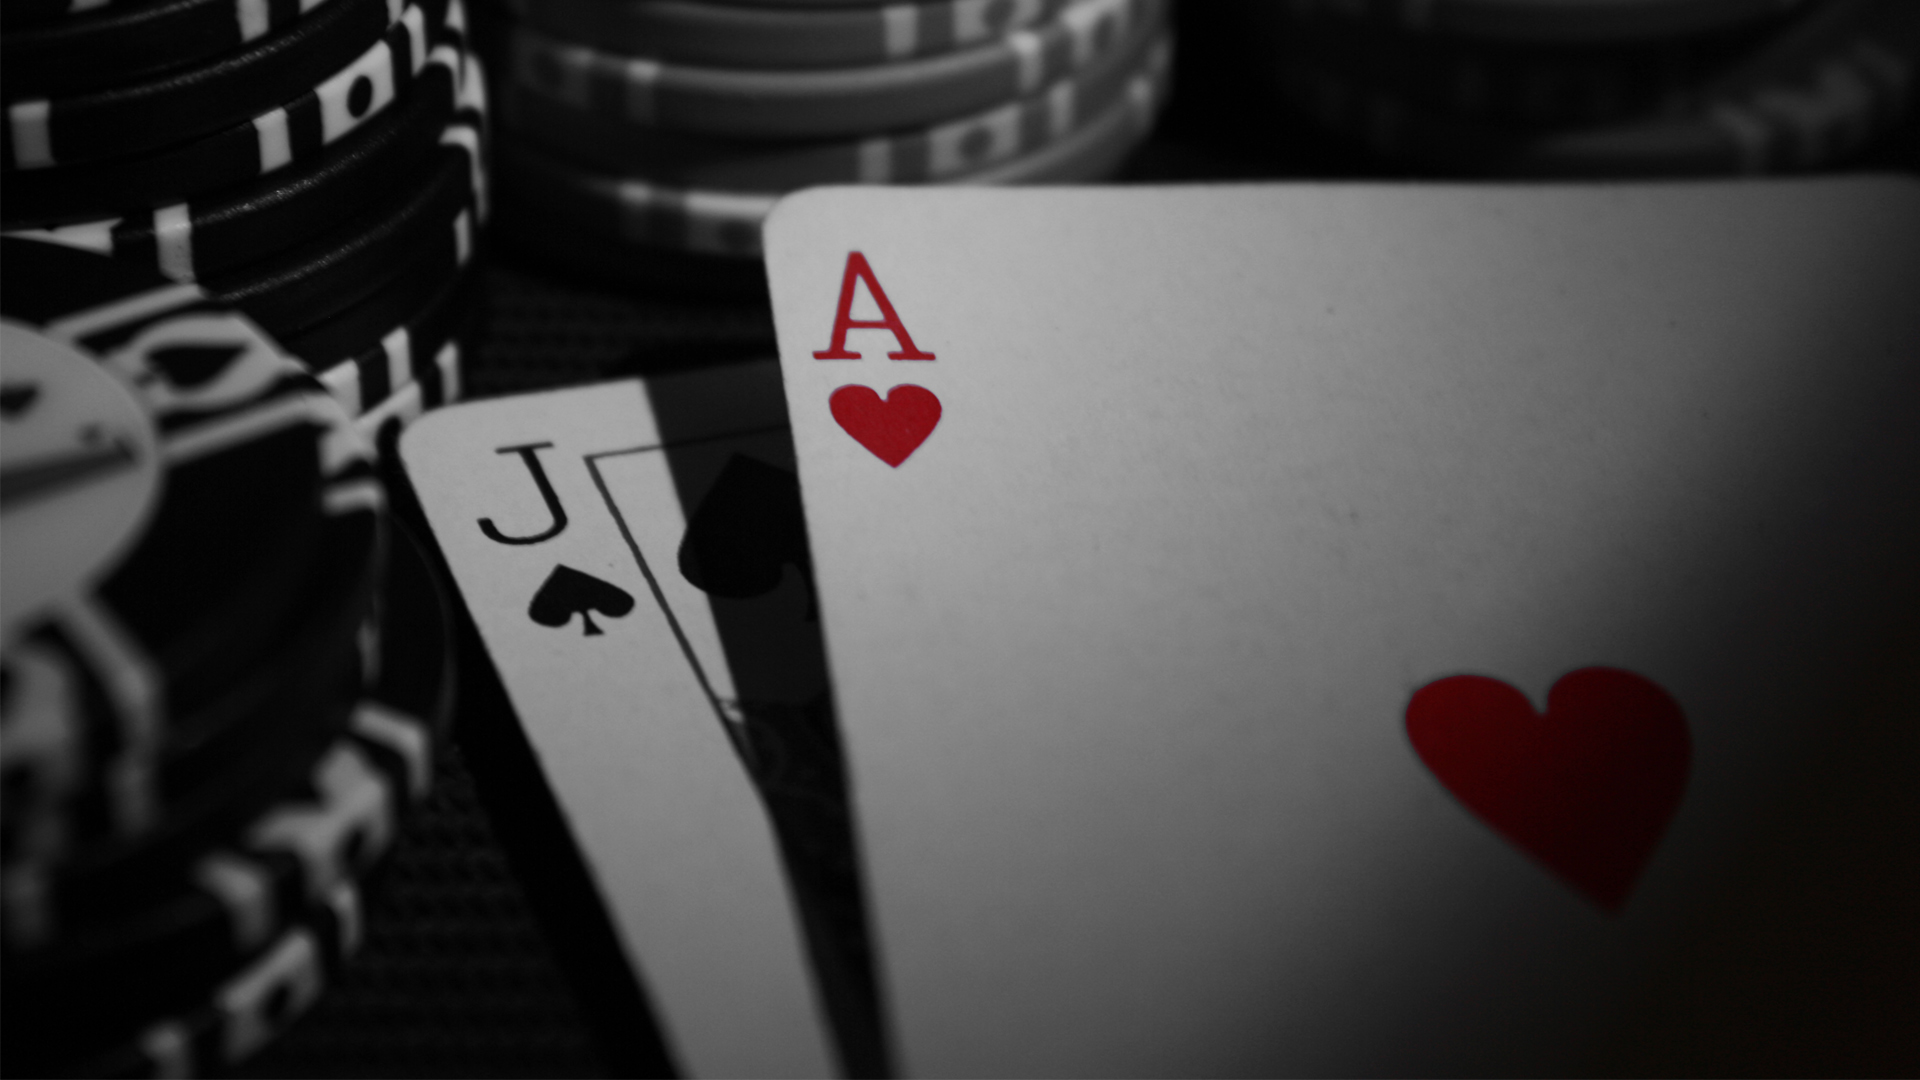 How to Count Cards in Blackjack - Step-by-Step